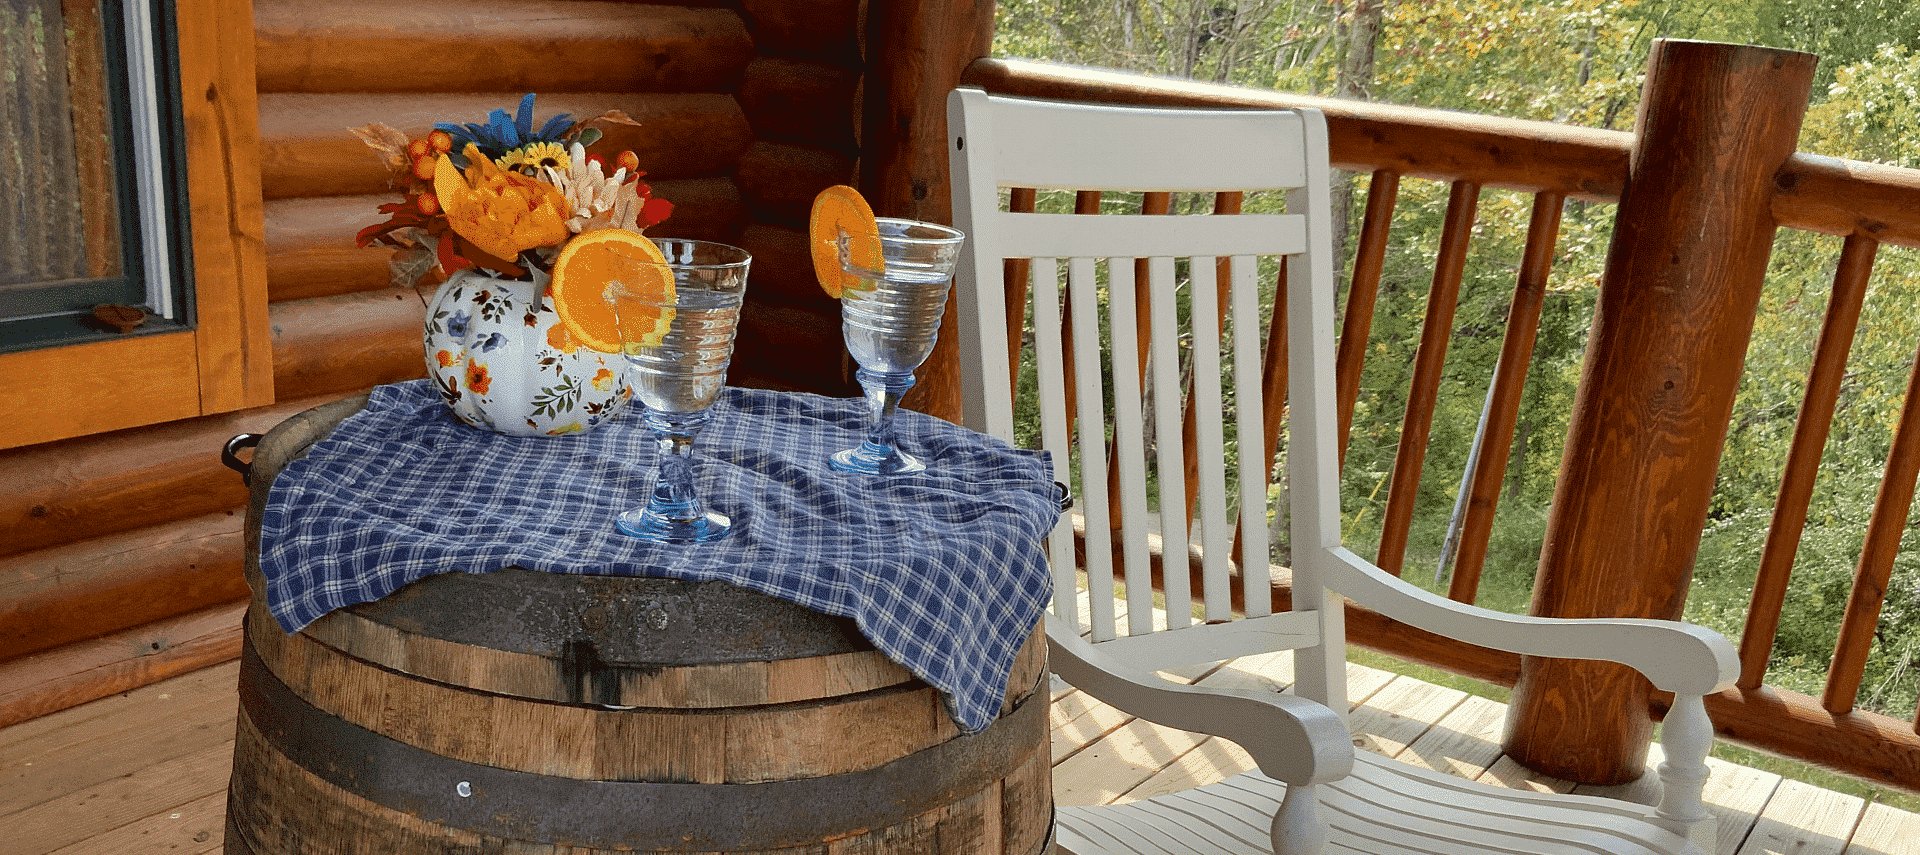 Outside porch of log home with white rocking chair next to a barrel holding glasses of water on a blue checkered cloth